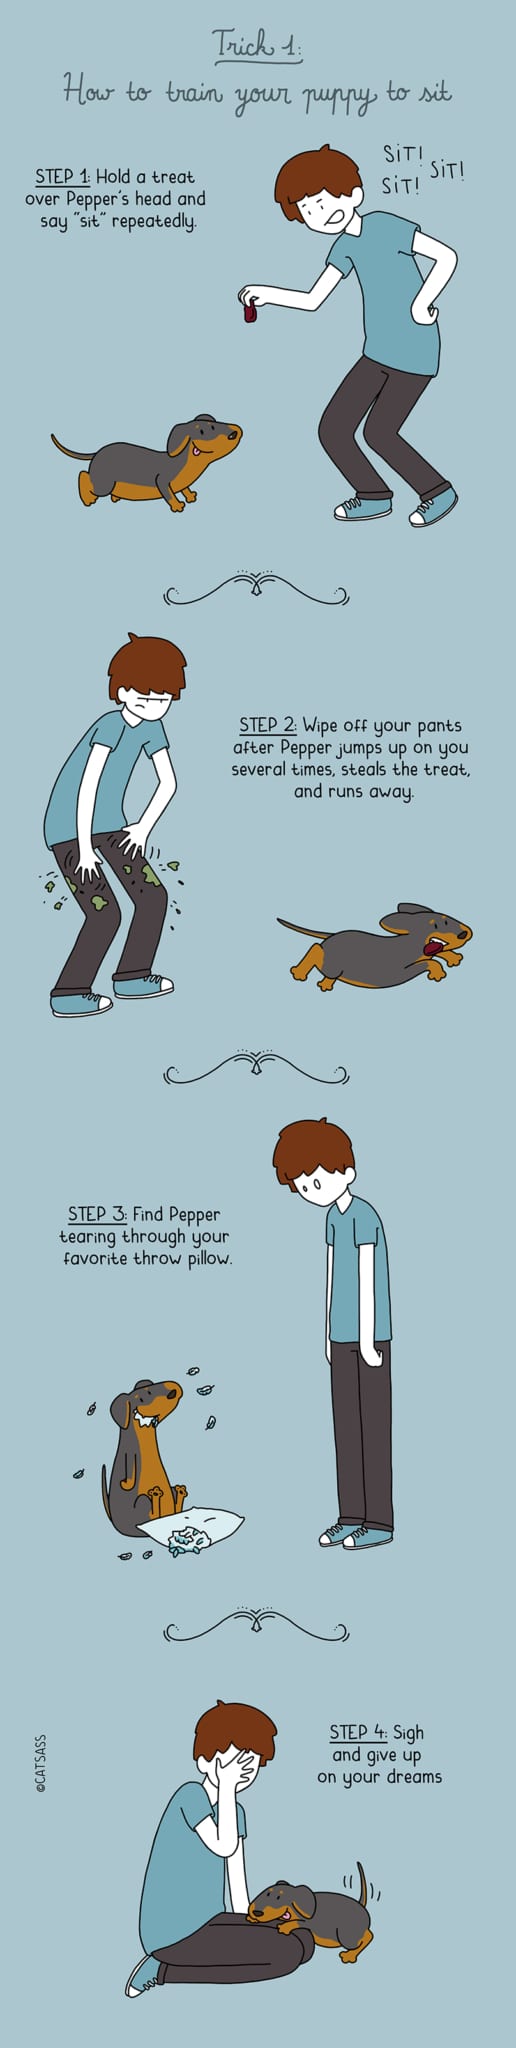 how-to-train-your-puppy-1